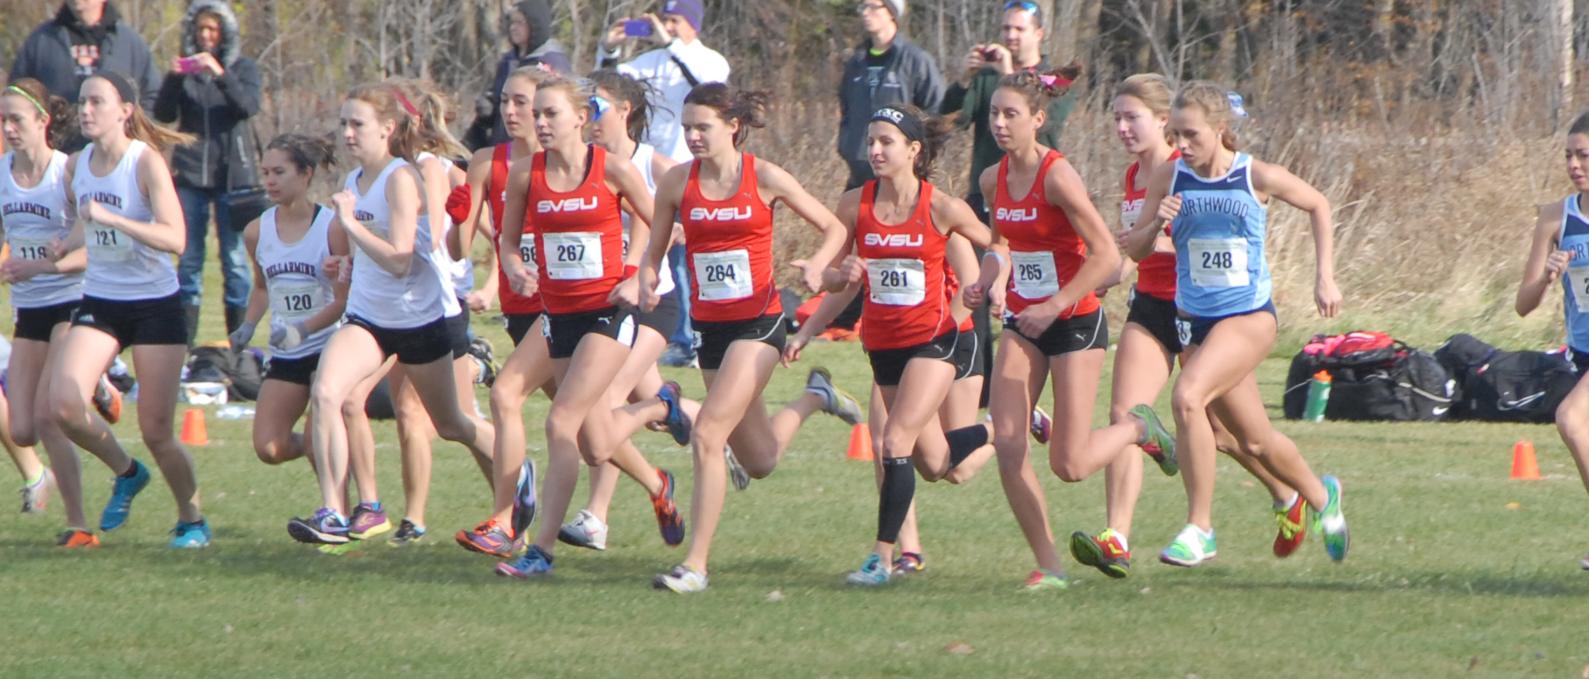 Women's Cross Country Team Earns National All-Academic Honors